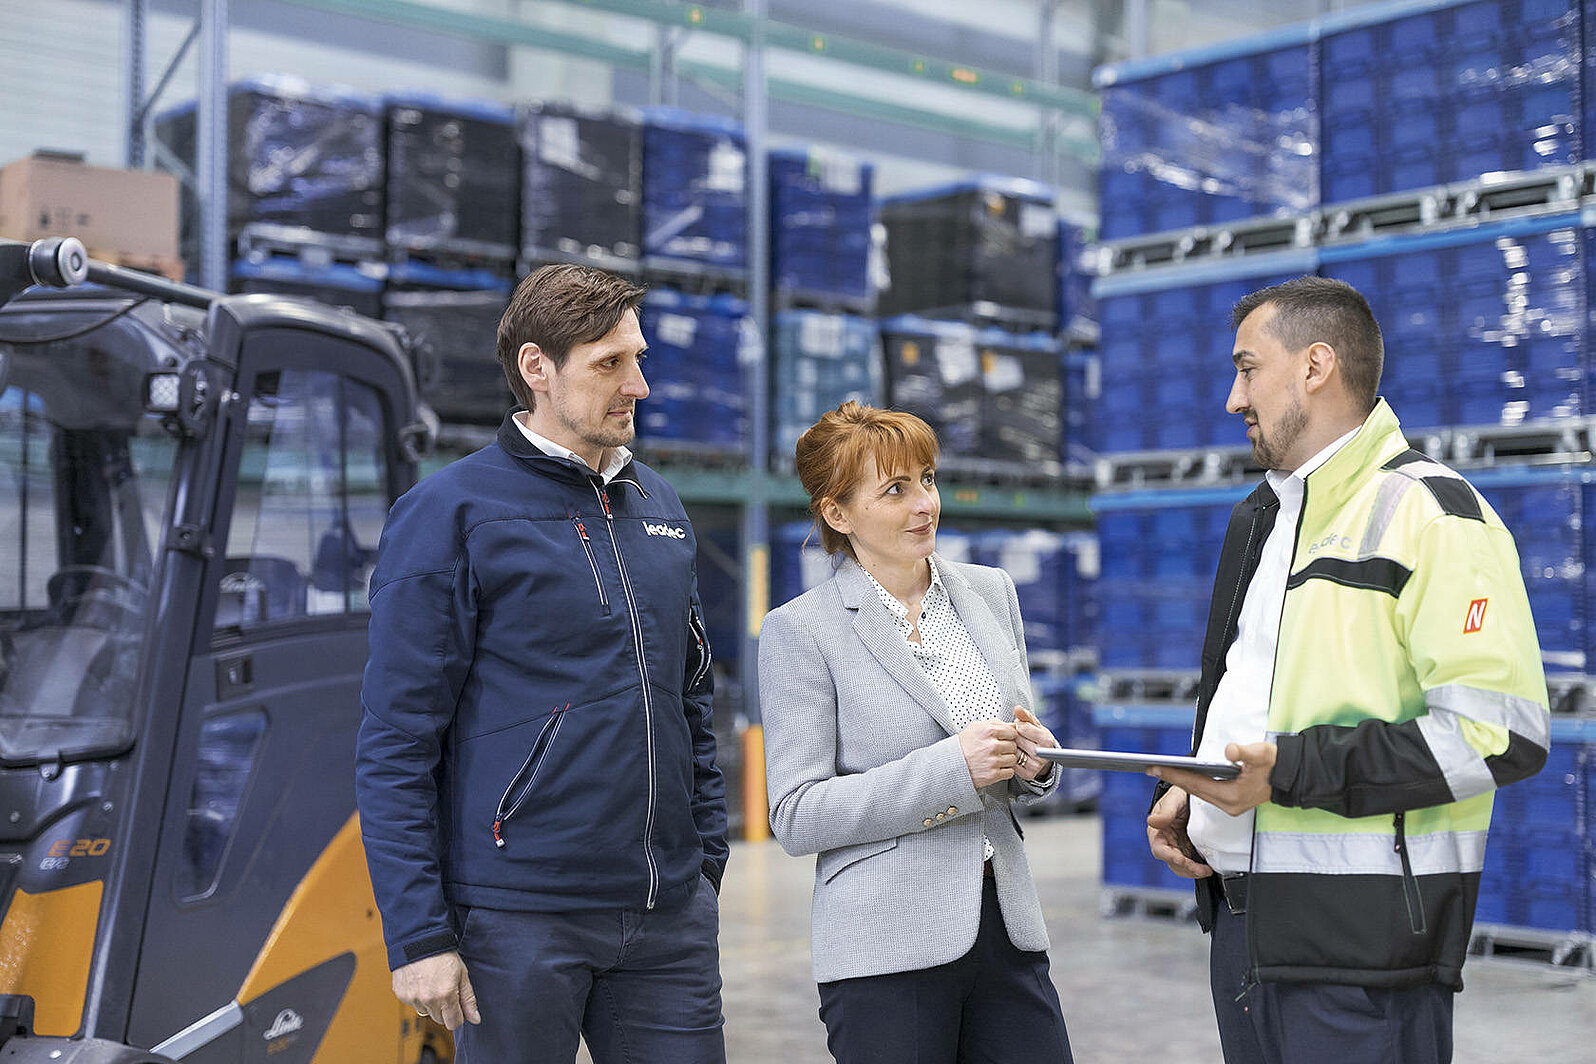 Leadec employees talking with a customer in a warehouse.